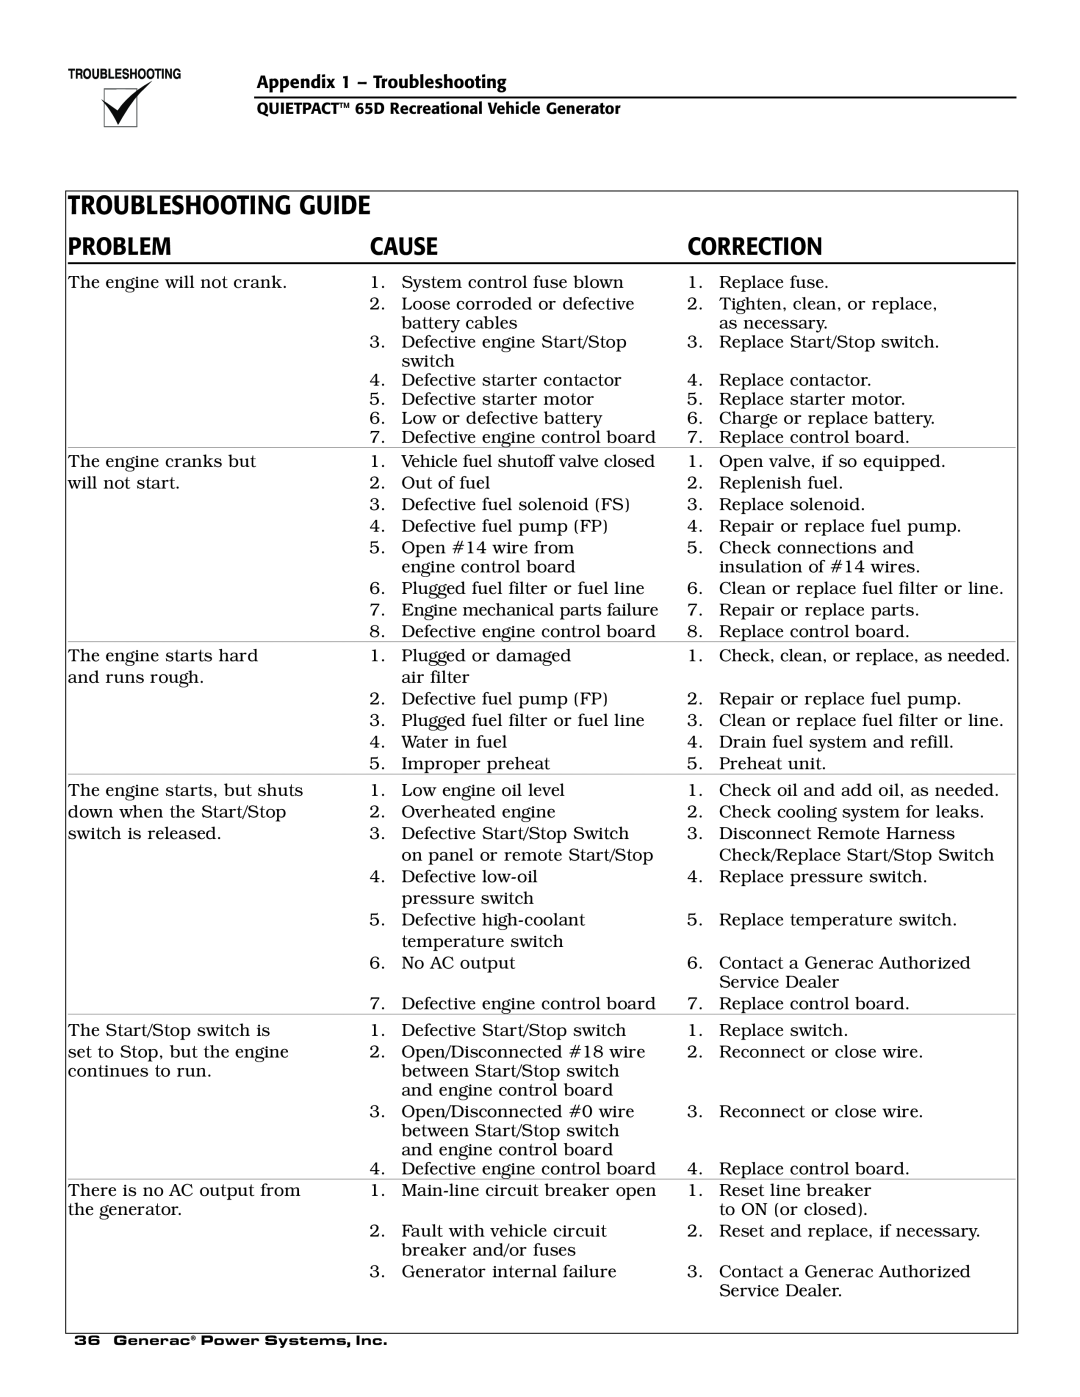 Generac 004614-1 owner manual Troubleshooting Guide, Problem, Cause, Correction 